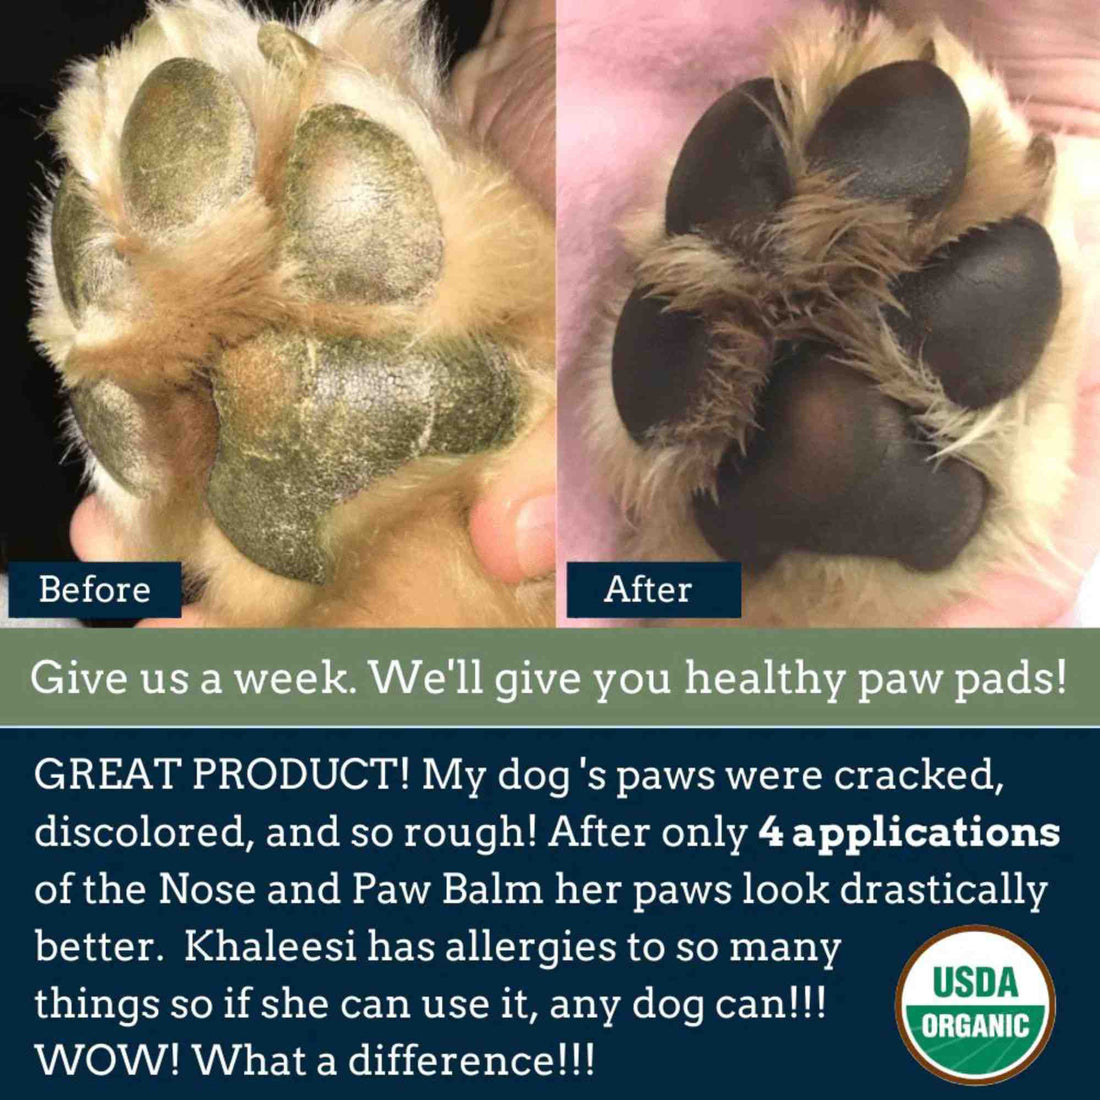 4-legger healing balm usda certified organic healing balm for dog nose and paw pads before and after photo